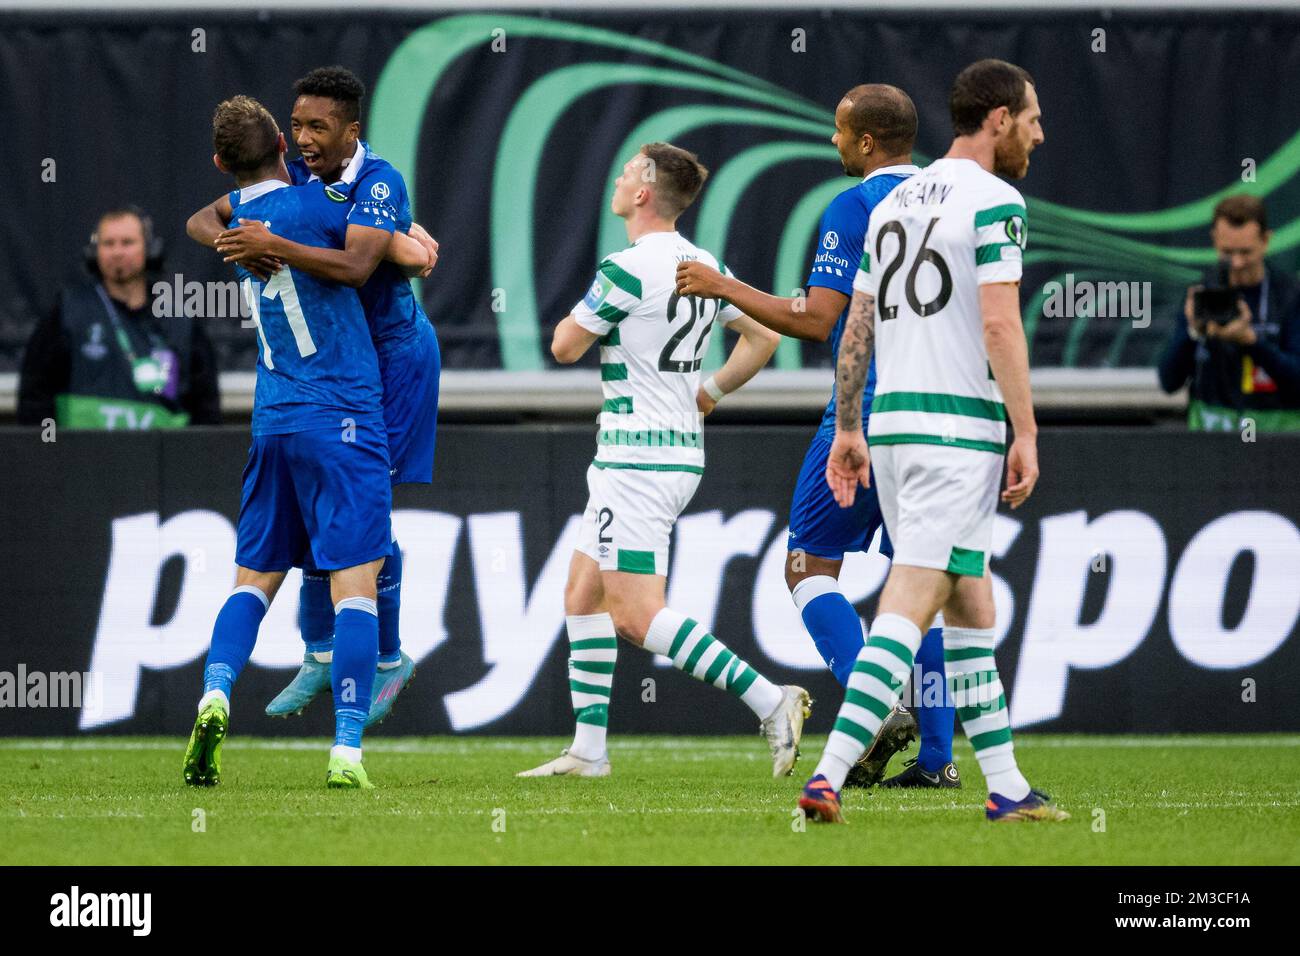 Gent's Hugo Cuypers celebrates after scoring during a soccer match between Belgian KAA Gent and Irish Shamrock Rovers F.C., Thursday 15 September 2022 in Gent, on day two of the UEFA Europa Conference League group stage. BELGA PHOTO JASPER JACOBS Stock Photo